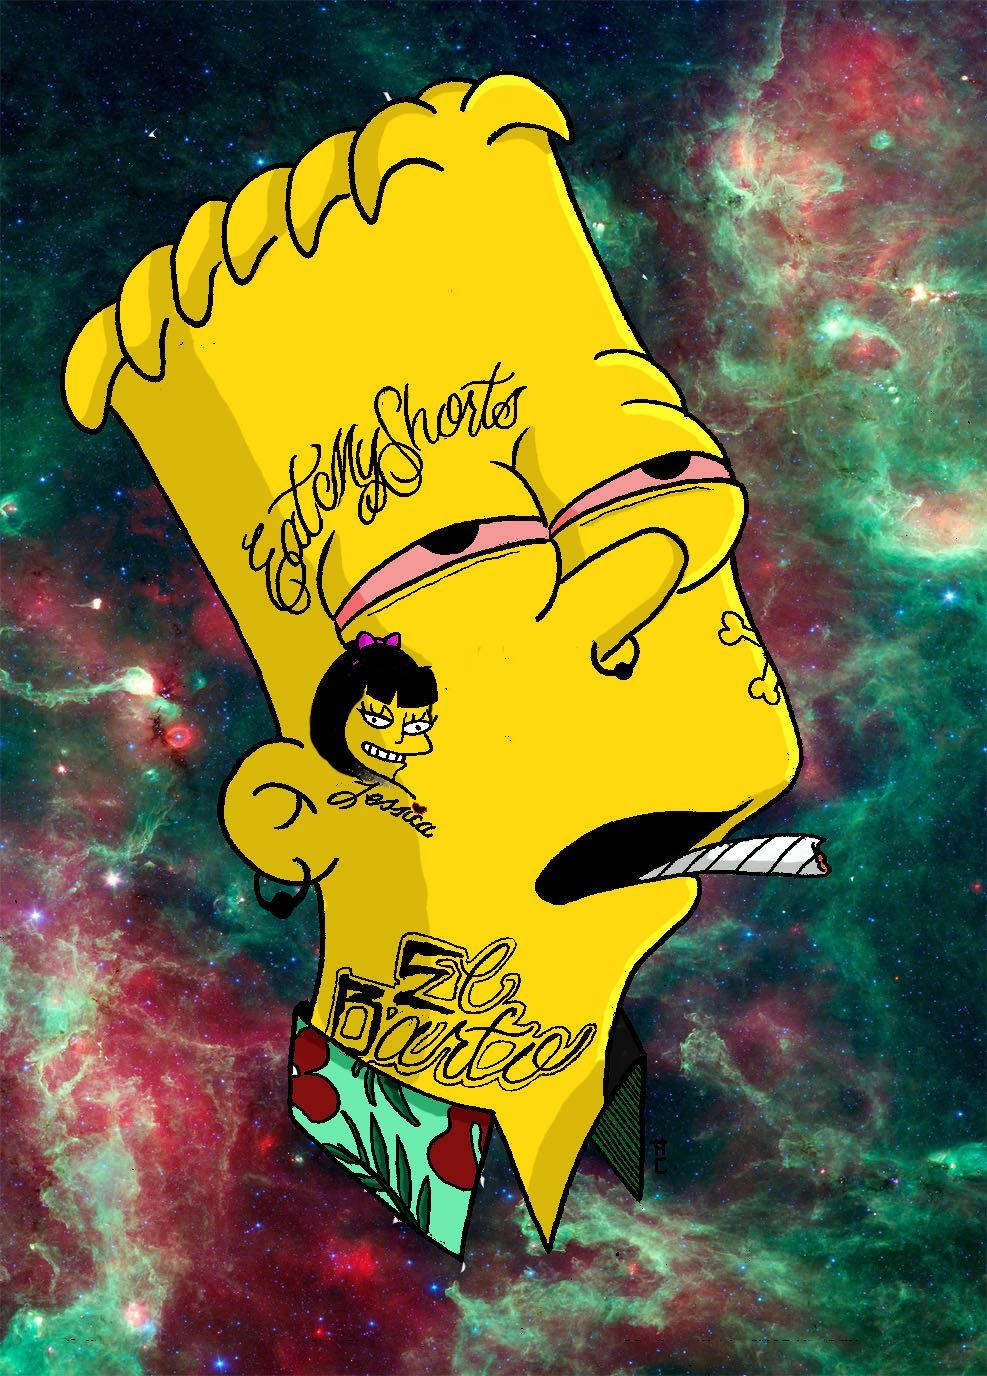 Download Bart Simpson Swag Iphone Theme Wallpaper